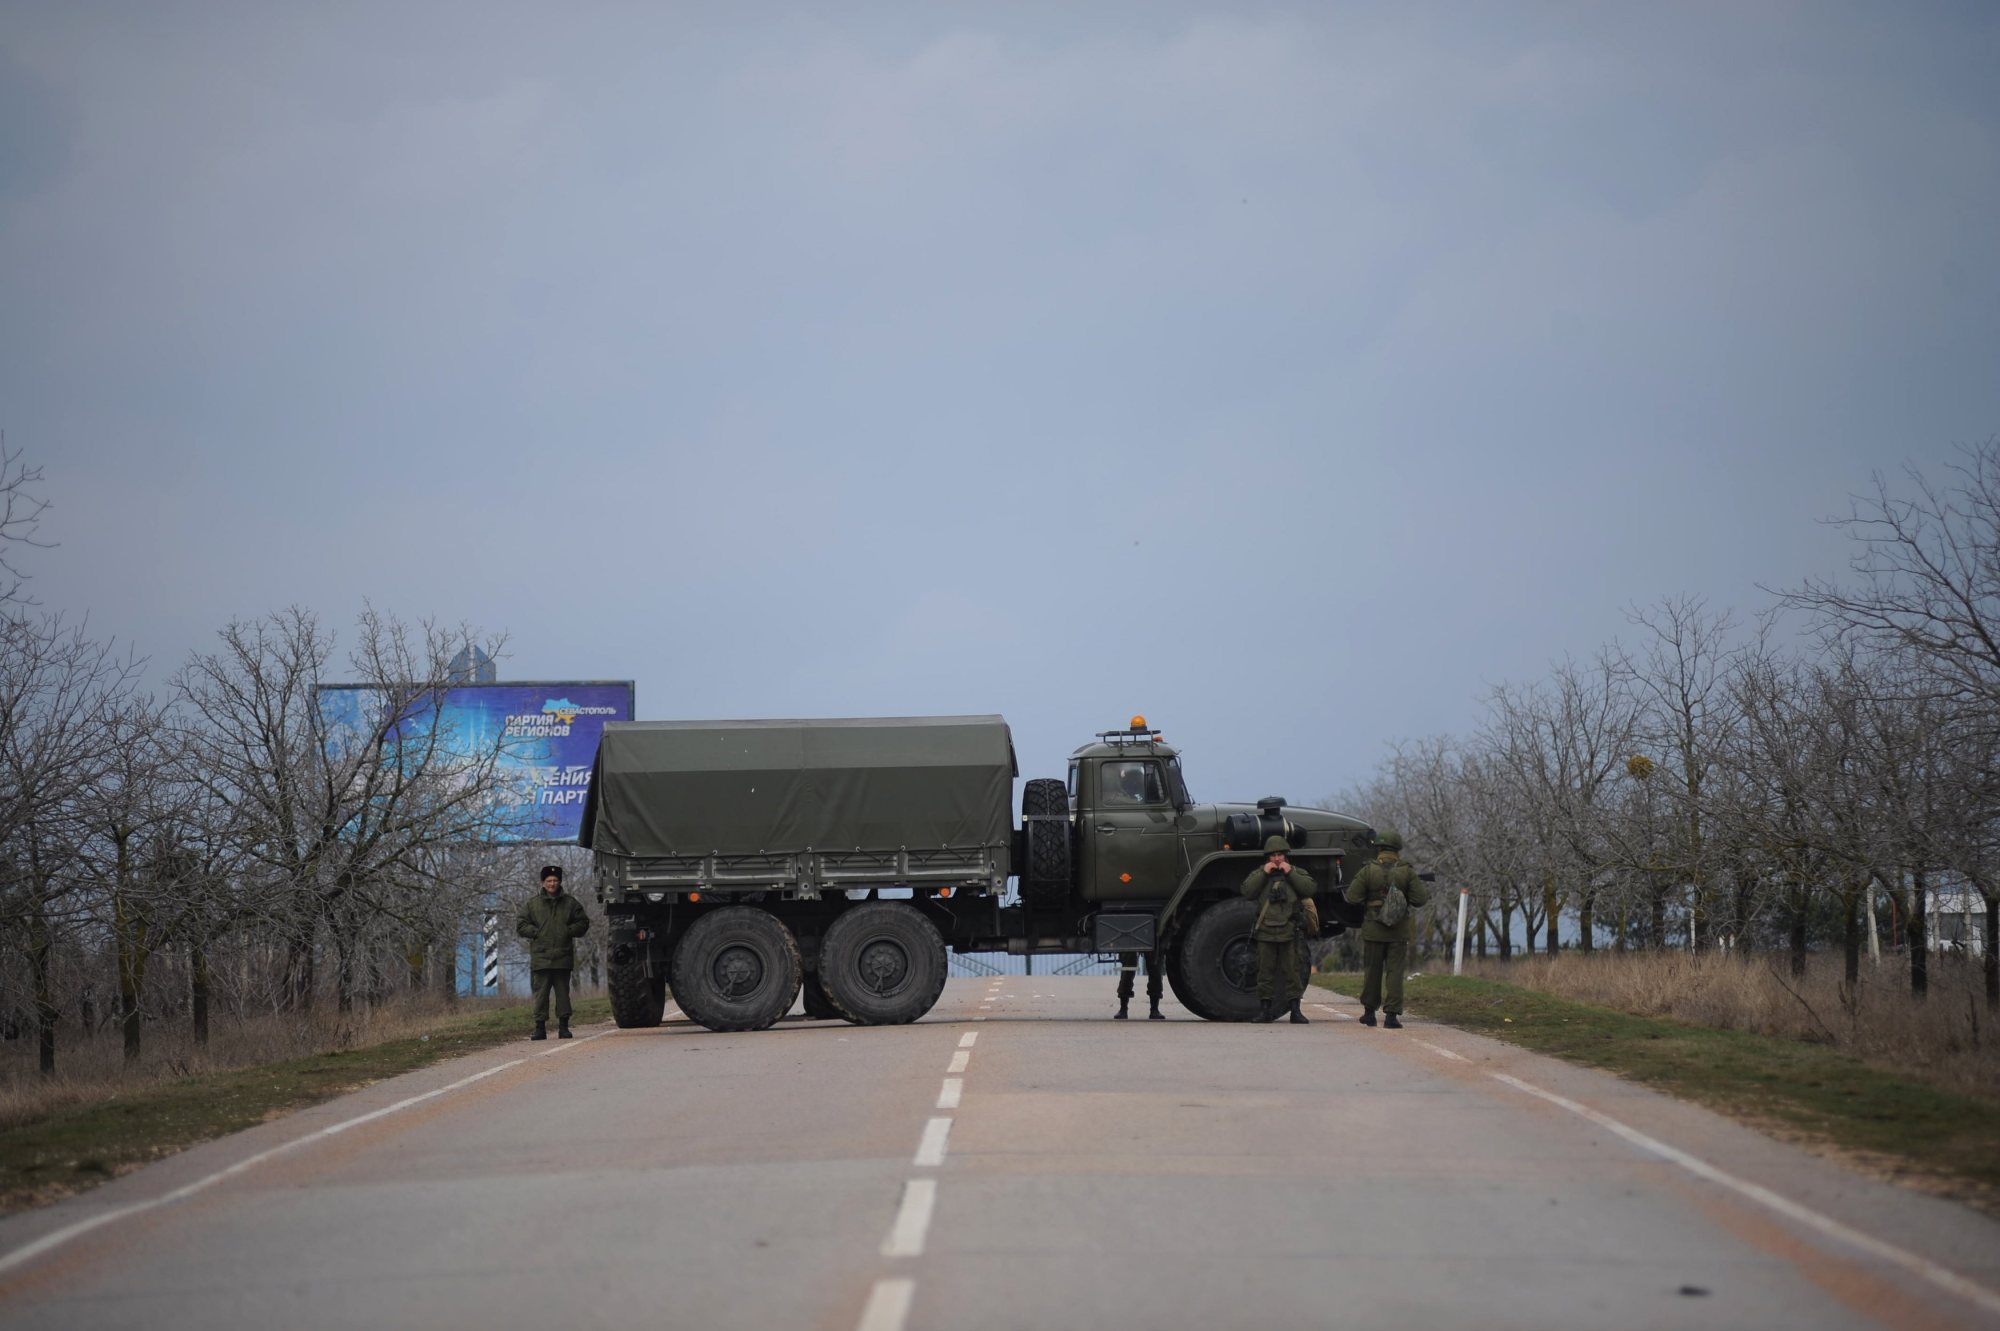 Russian troops block the road way towards the military airport at the Black Sea port of Sevastopol in Crimea, Feb. 28, 2014.